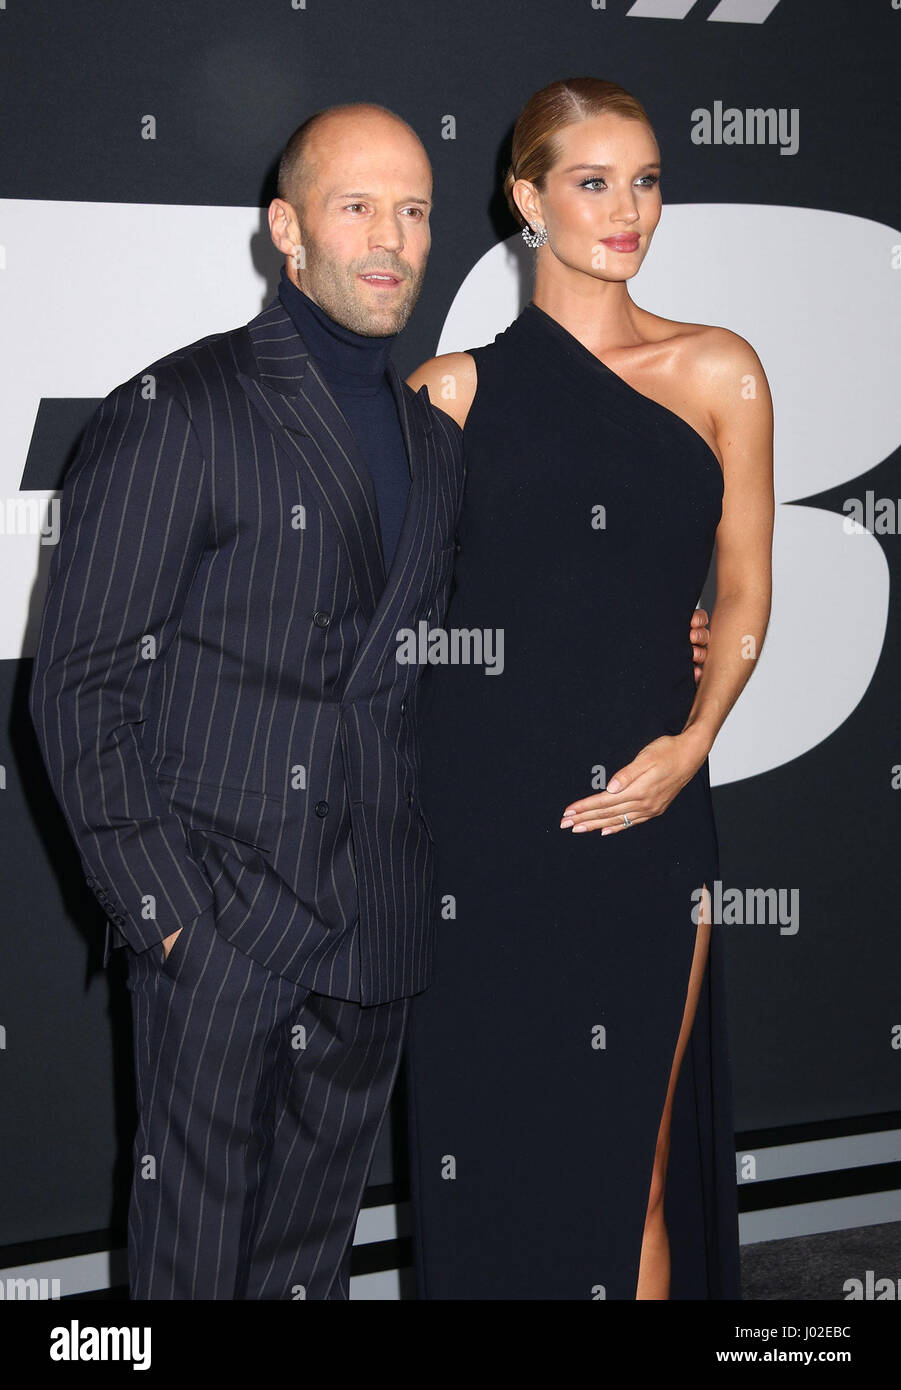 Jason statham and wife hi-res stock photography and images - Alamy